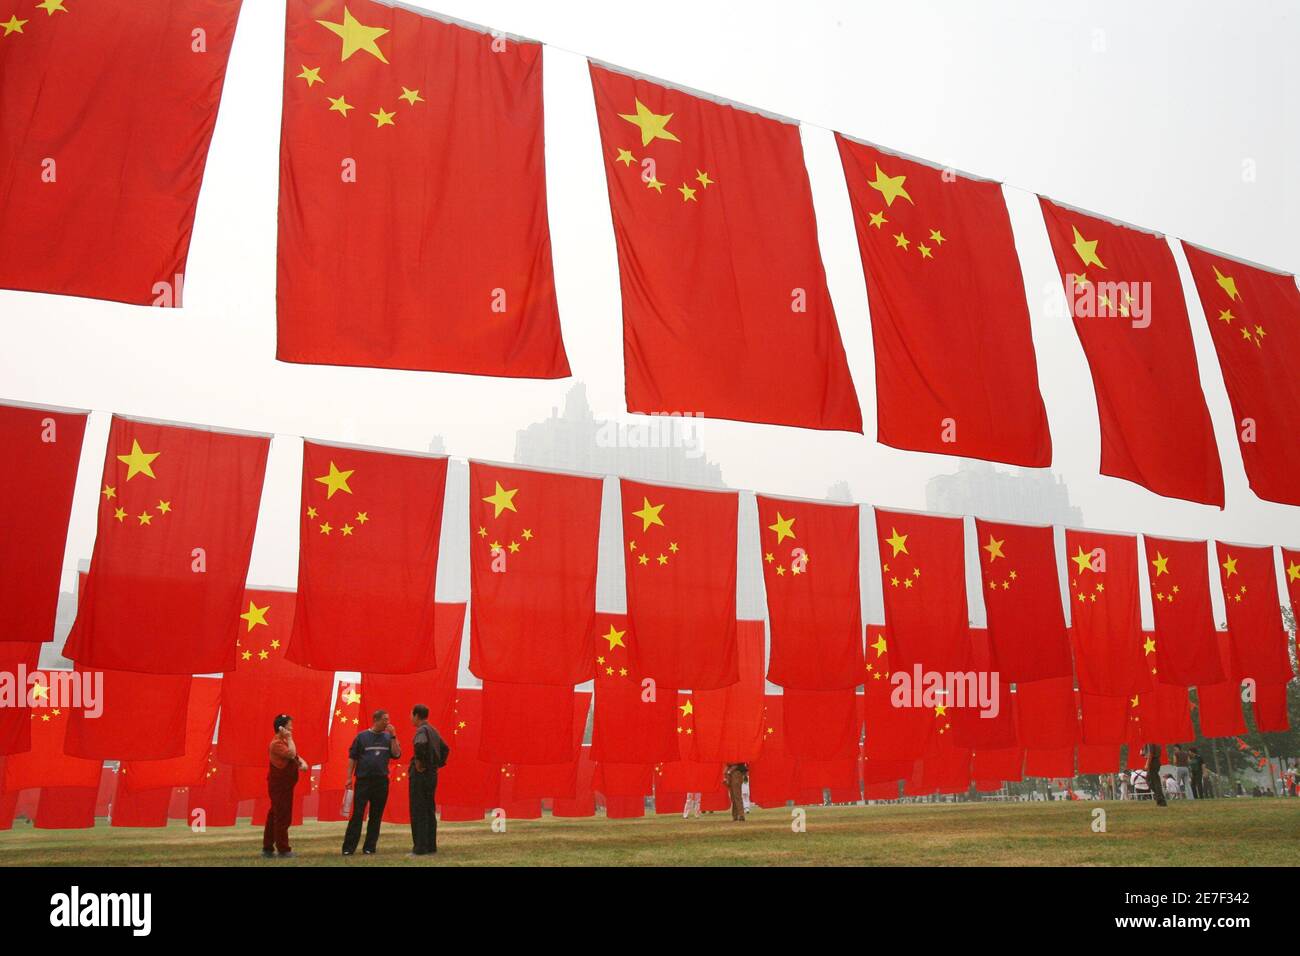 Visitors chat amidst Chinese national flags displayed at a park to celebrate National Day in Beijing October 6, 2006.  China is celebrating a week-long National Day holiday or 'Golden Week' holiday, which runs from October 1 to 7.       REUTERS/Claro Cortes IV    (CHINA) Stock Photo